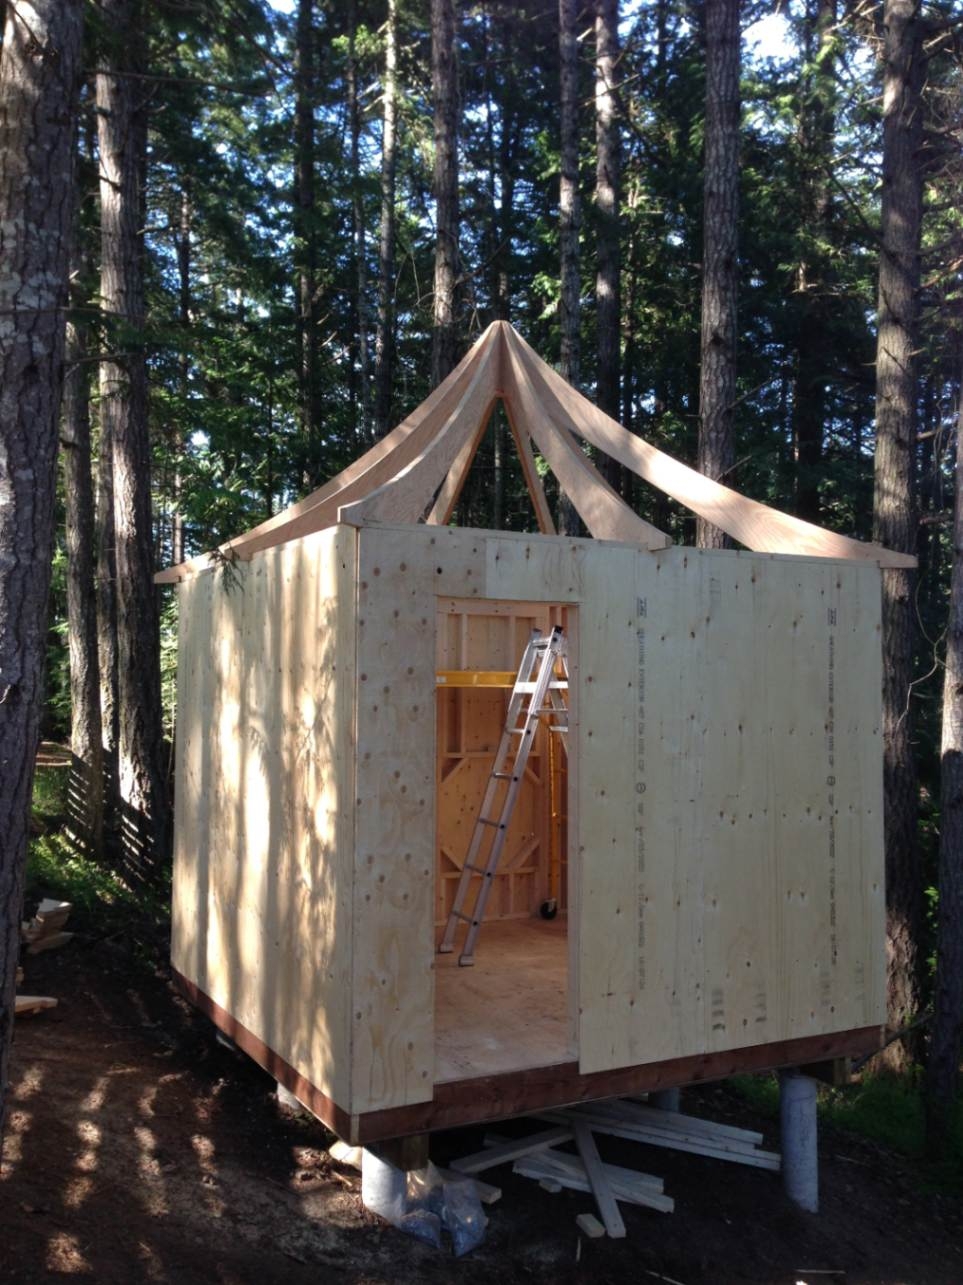 Rear view of 10' x 10' Melbourne Home Studio located in Salt Springs, British Columbia - Summerwood 